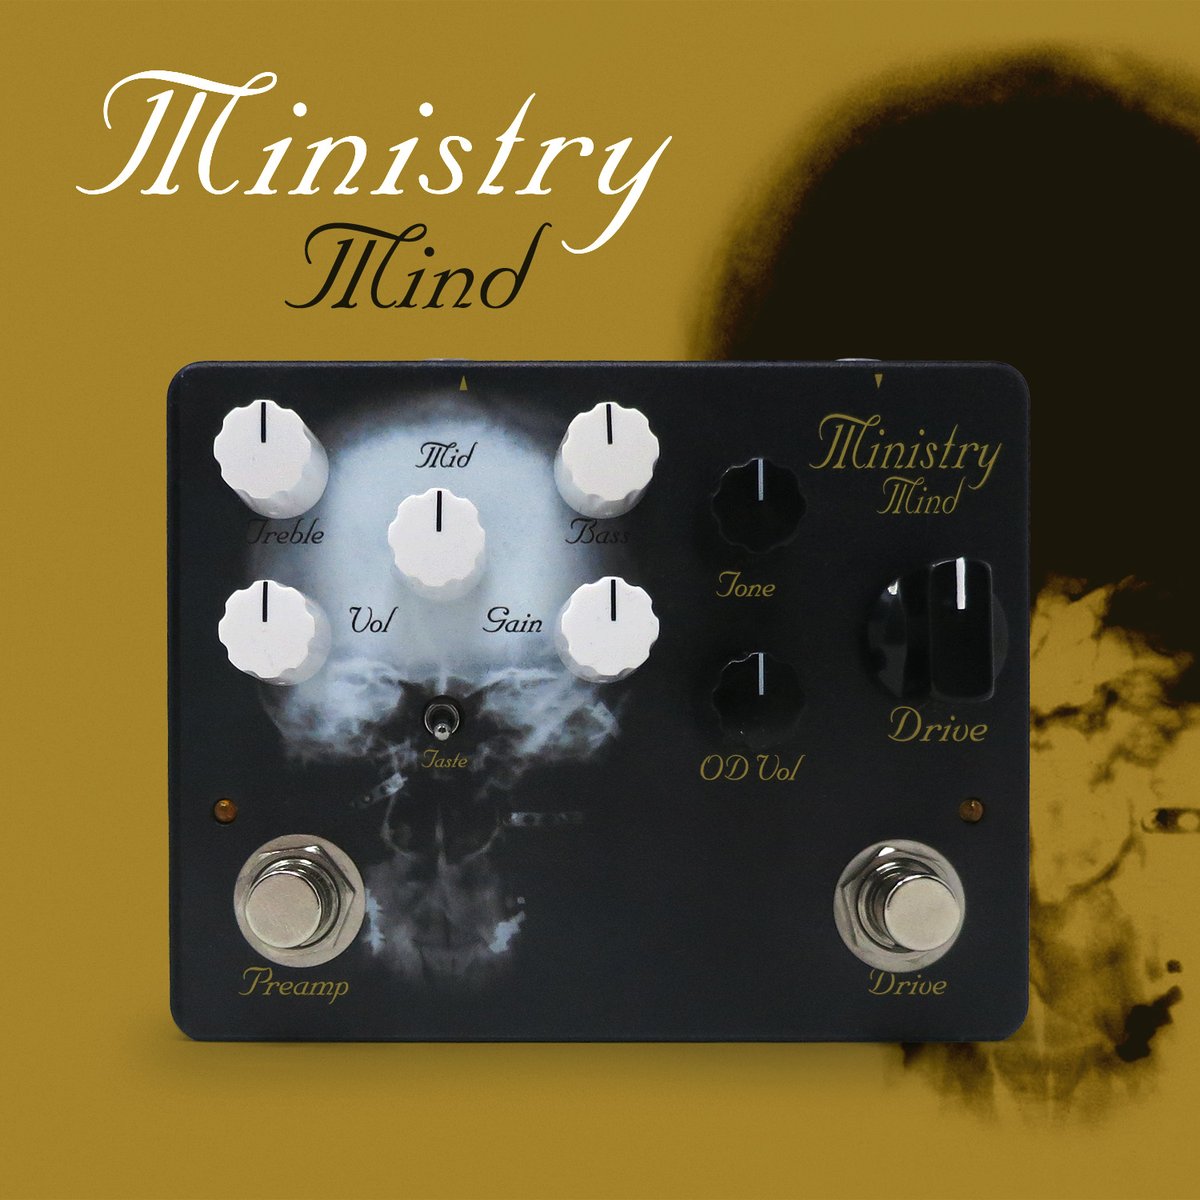 LIMITED custom made Ministry pedal 'Mind' is alive! 1+ year to create & hone to perfection. Stage-ready, high-end audio gear. 2-in-1 overdrive-and-amp pedal. Ships w/Certificate SIGNED by Al! guitar-tested in the EU. ministrypedal.com